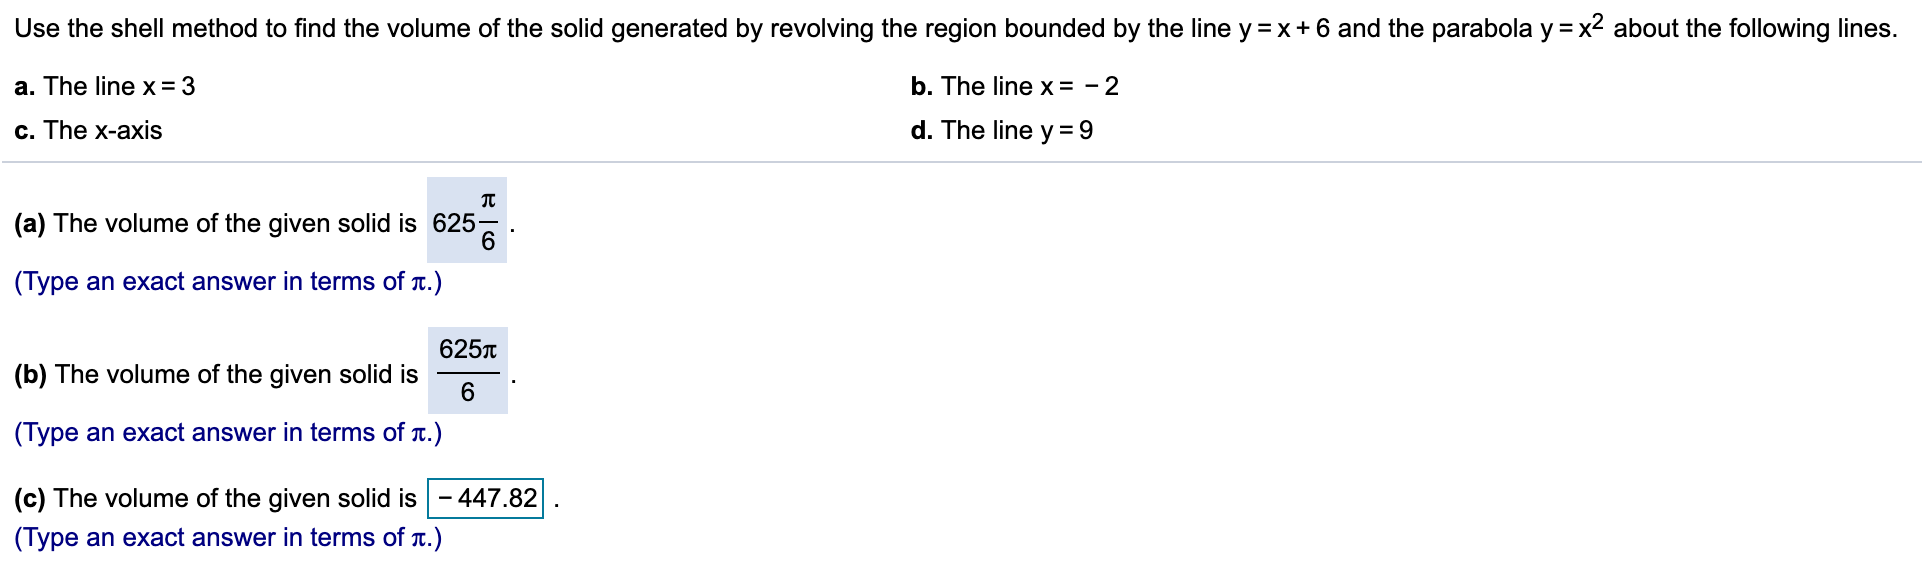 Use the shell method to find the volume of the solid generated by revolving the region bounded by the line y =x +6 and the parabola y = x2 about the following lines.
a. The line x= 3
b. The line x = - 2
d. The line y = 9
c. The x-axis
(a) The volume of the given solid is 625
6
(Туре
an exact answer in terms of t.)
6257
(b) The volume of the given solid is
6
(Туре
an exact answer in terms of t.)
447.82
(c) The volume of the given solid is
(Type an exact answer in terms of T.)
